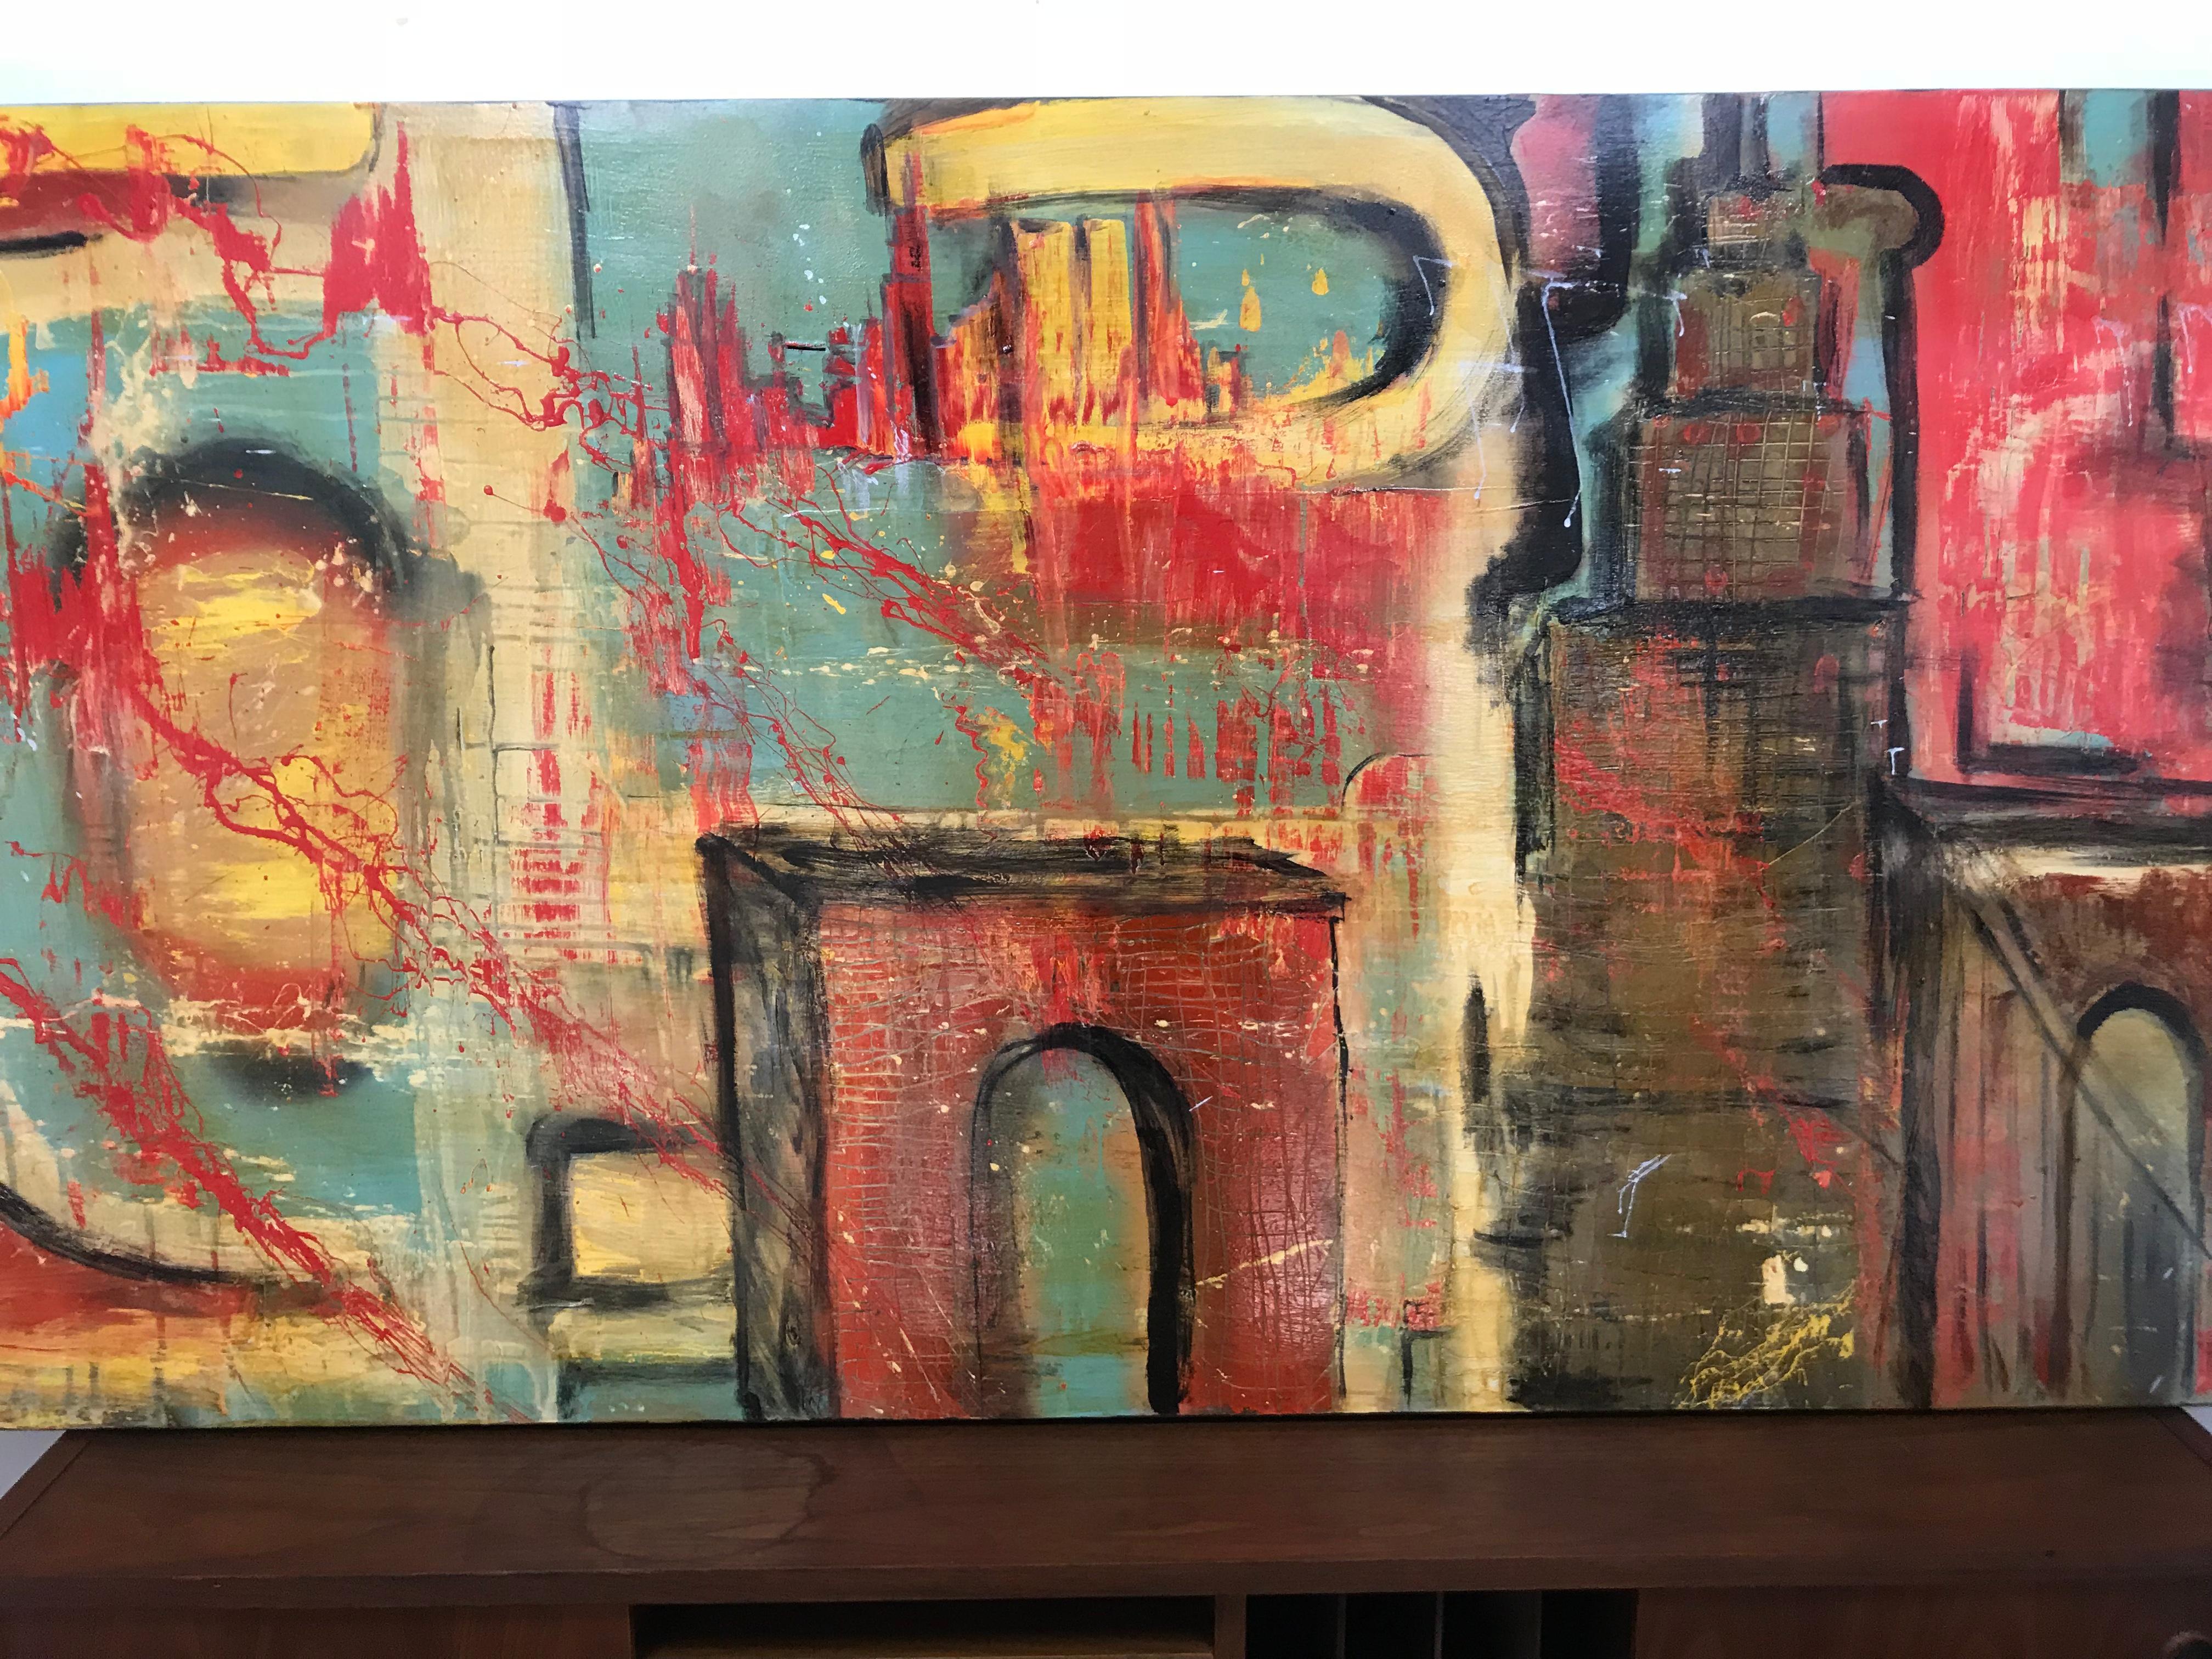 Monumental contemporary abstract oil painting 'Cityscape' 2018 by Peter Caruso,, Amazing use of color, texture and space. Large oil paint on board.